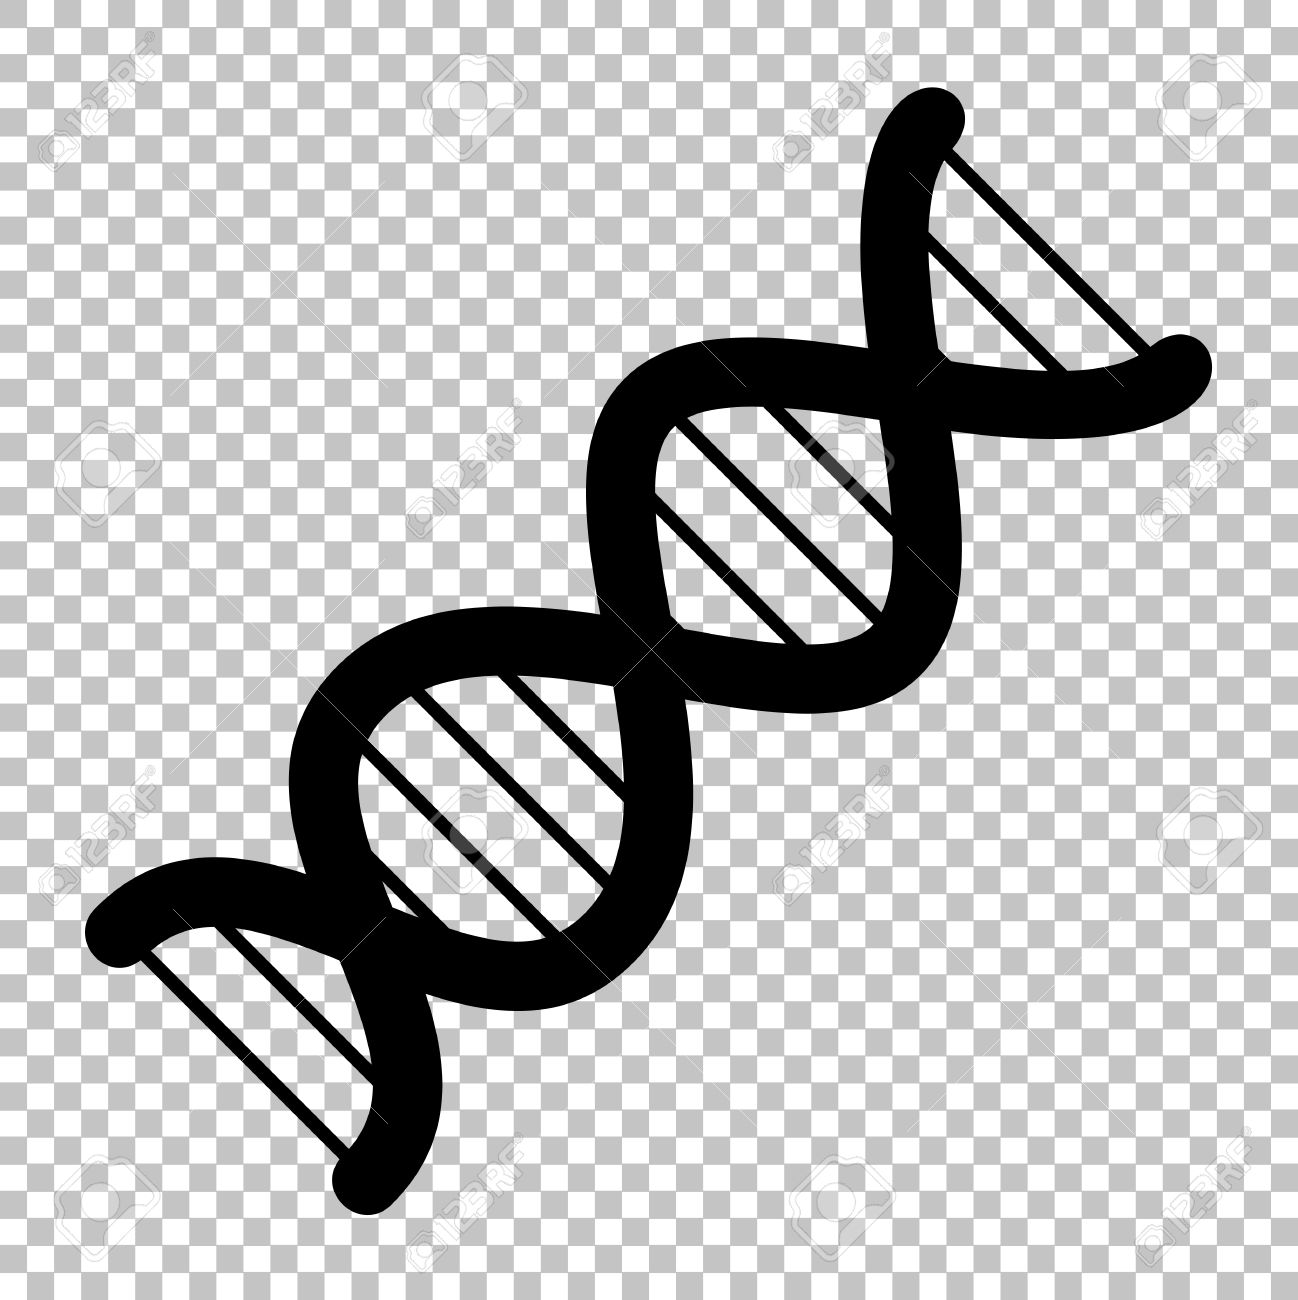 1029 Dna free clipart.